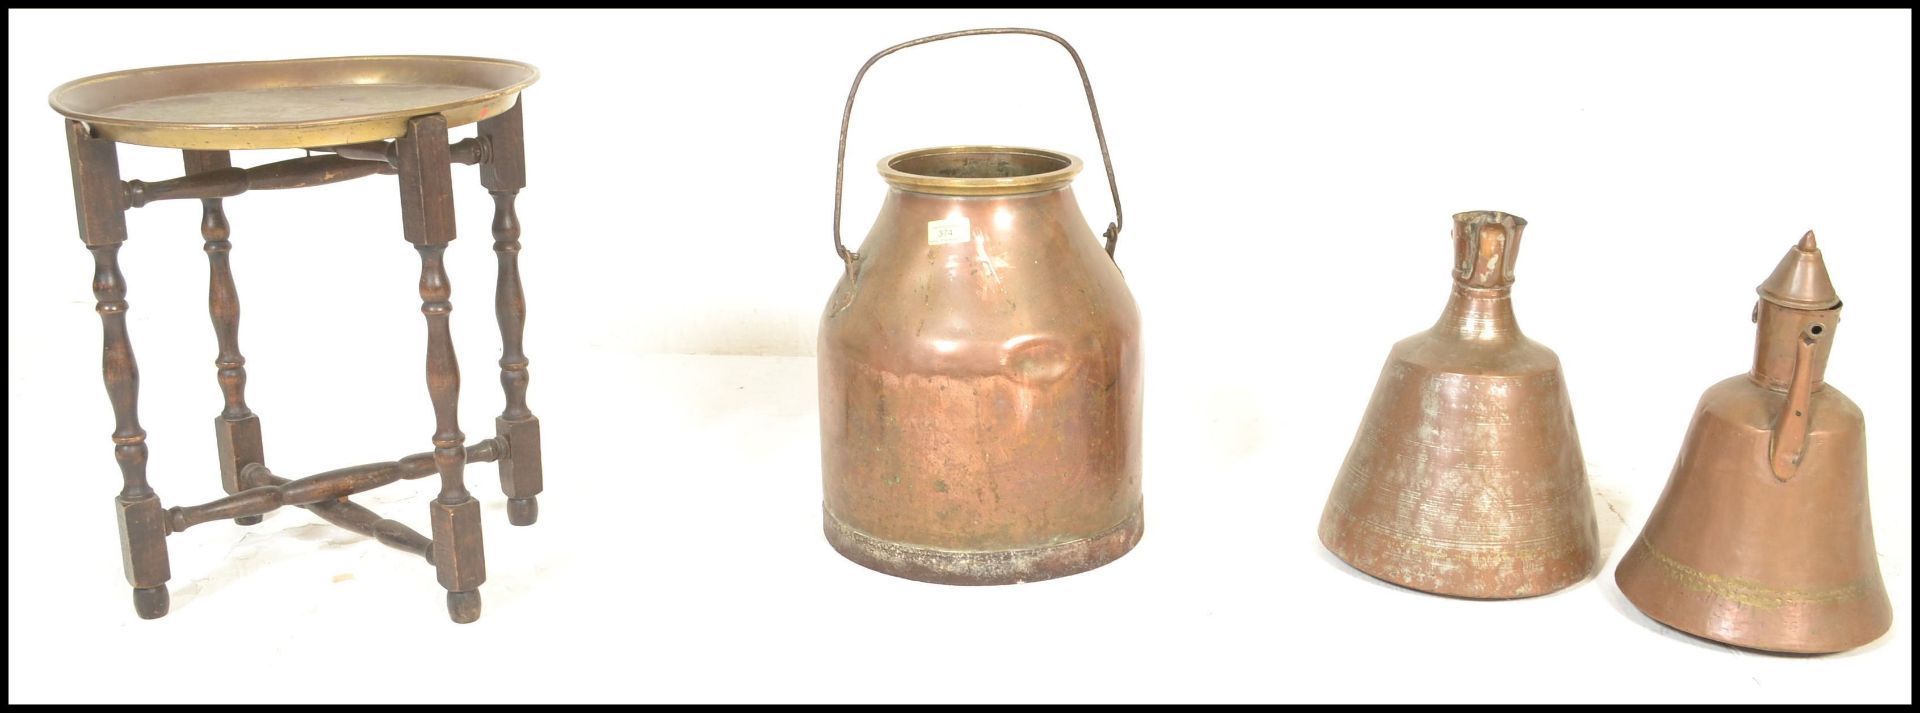 A 19th Century copper milk churn together with two Persian style hand worked coffee pots and a